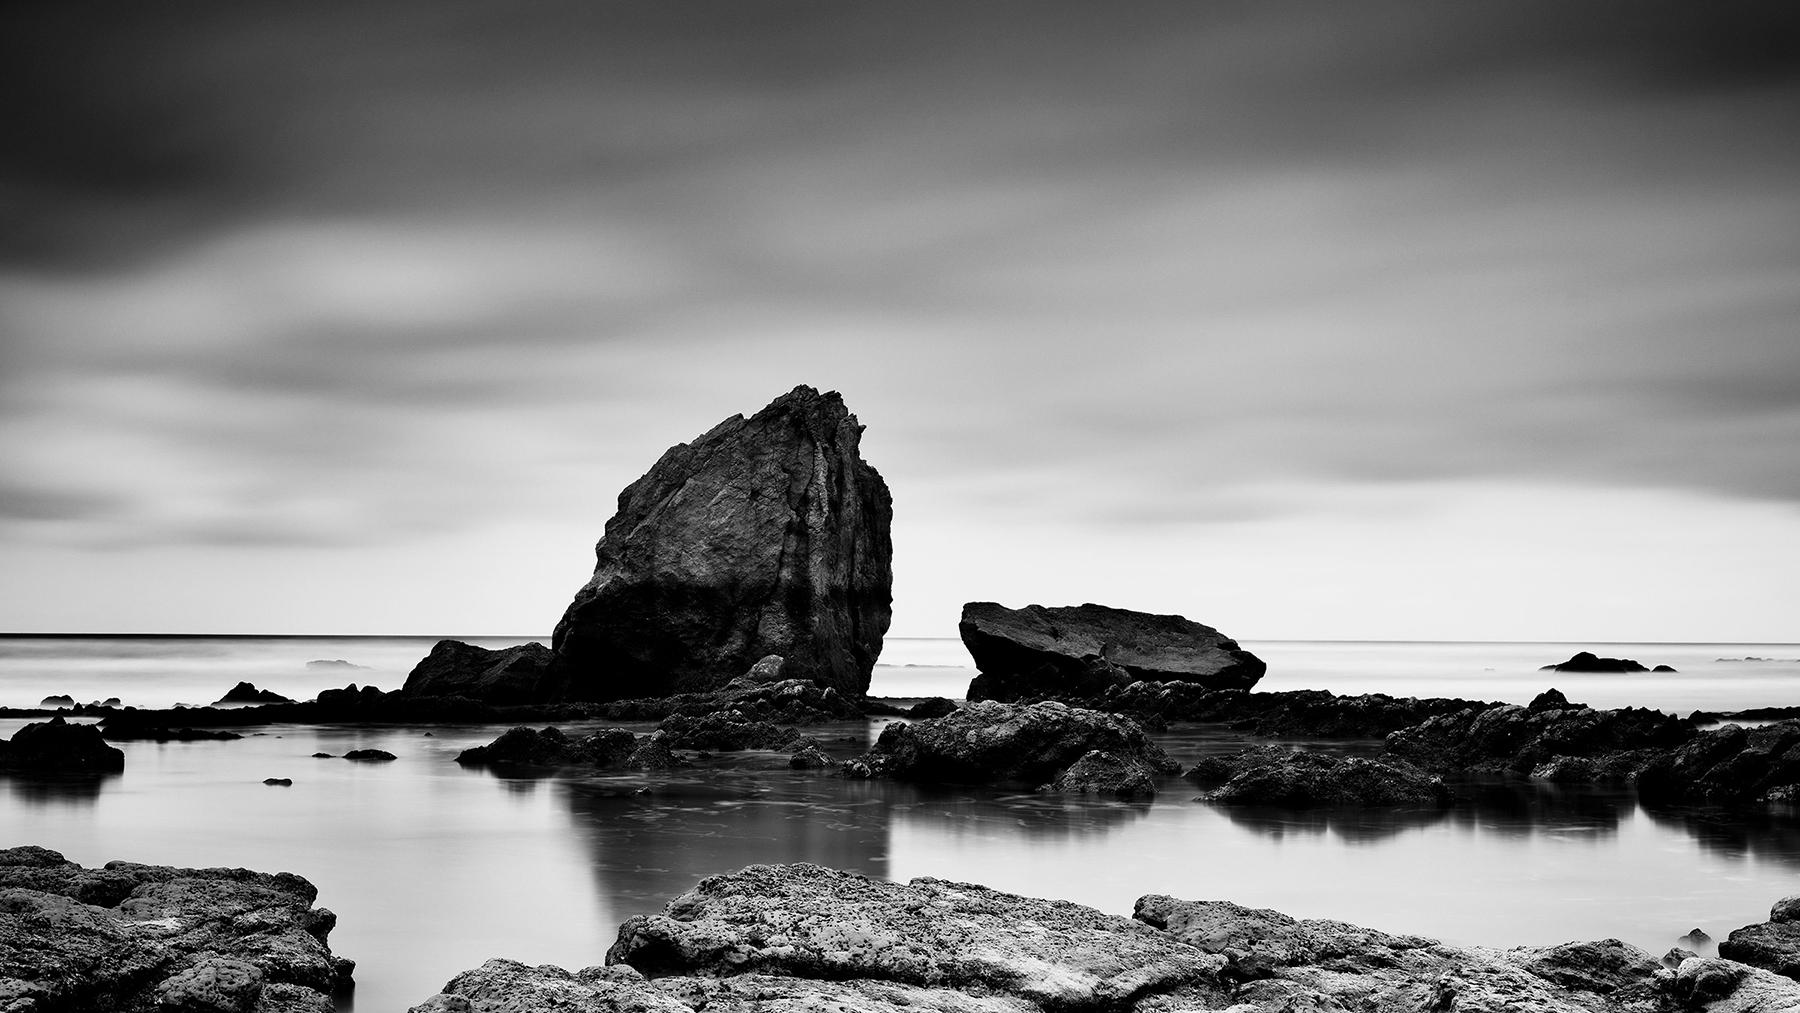 Gerald Berghammer Black and White Photograph - Beach Rock Panorama, Shoreline, France, black and white landscape photography